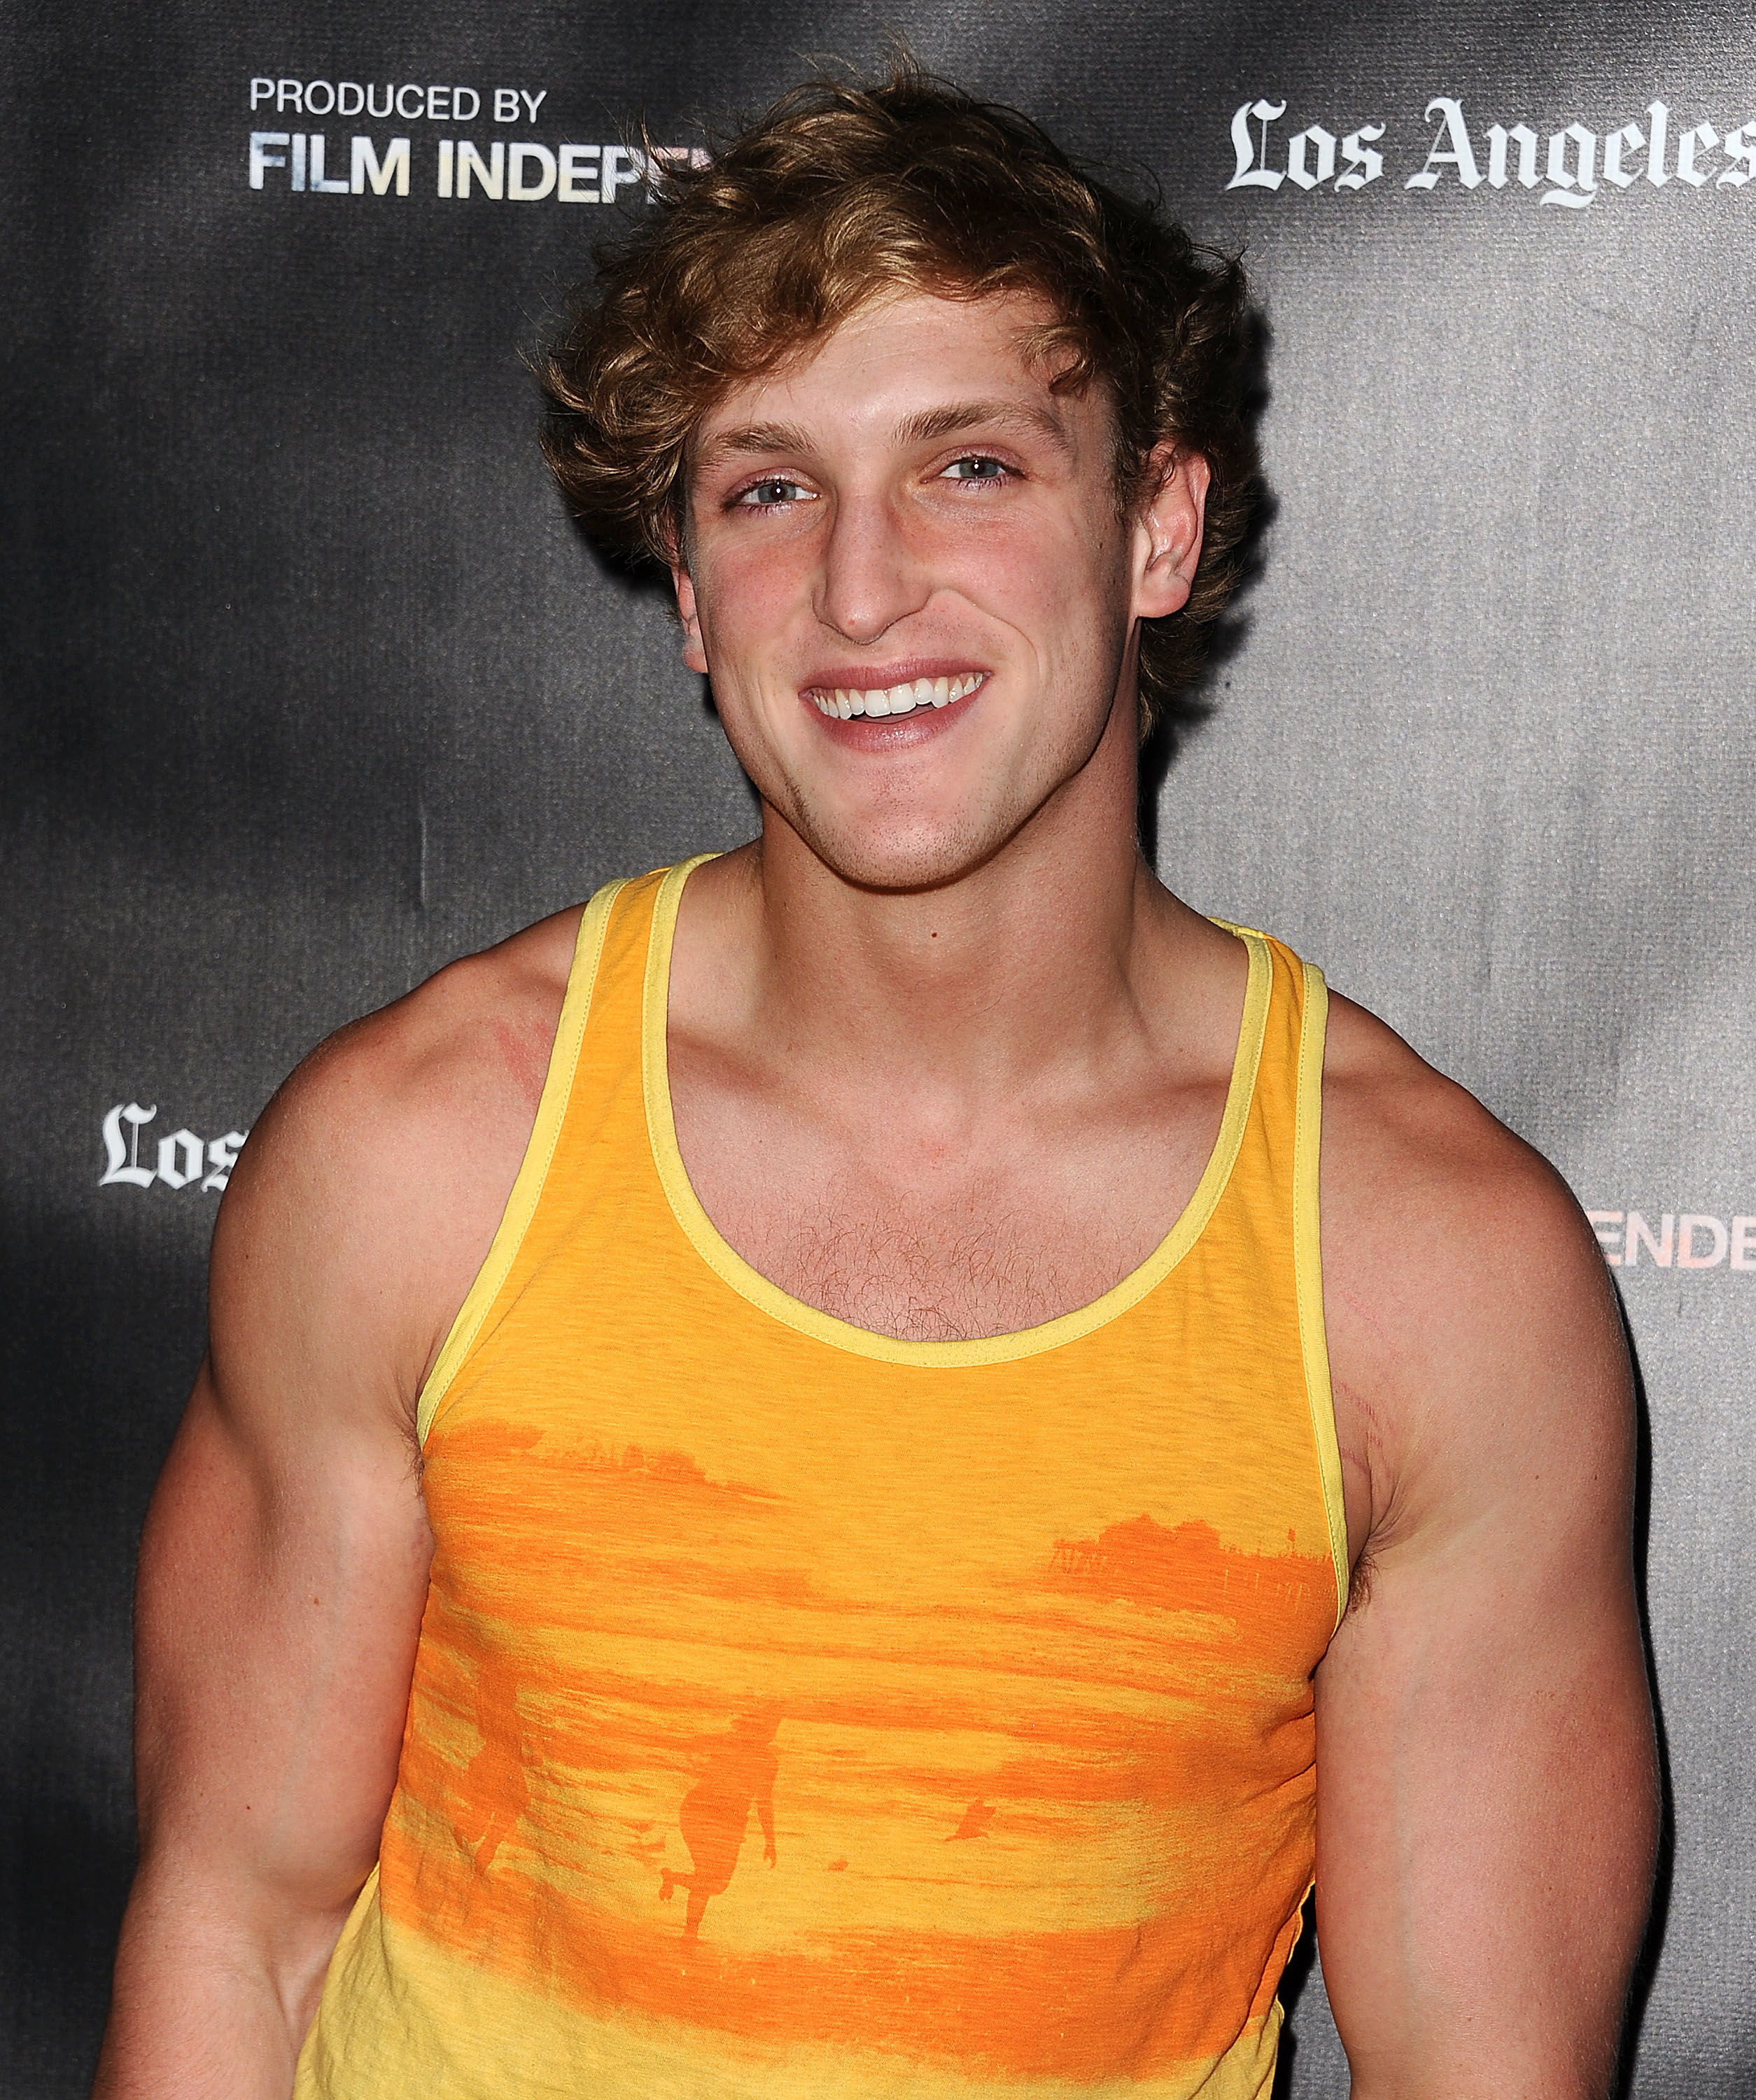 Logan Paul at a live read of &quot;Fast Times At Ridgemont High&quot; on June 18, 2015 in Los Angeles, California